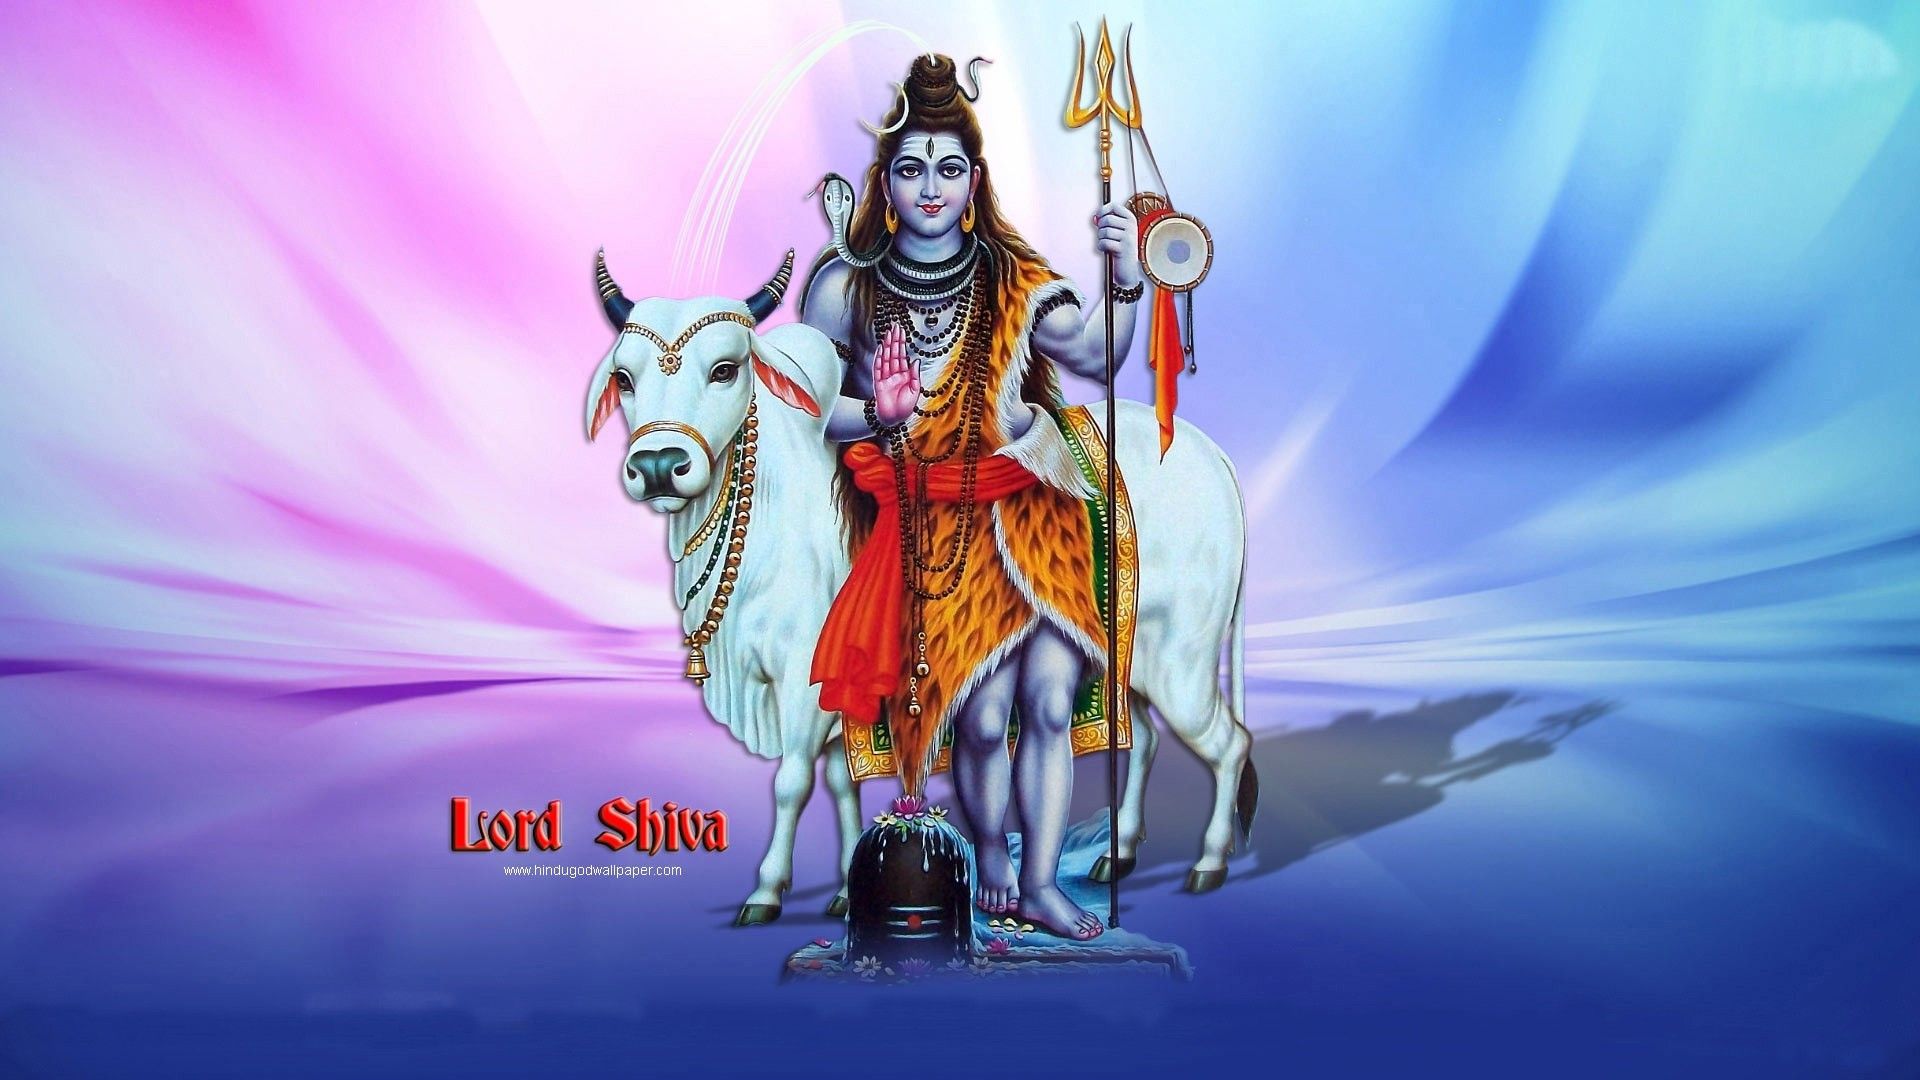 1920x1080 SHIVA HD WALLPAPERS 1080P PICTURES IMAGES HD Hindu